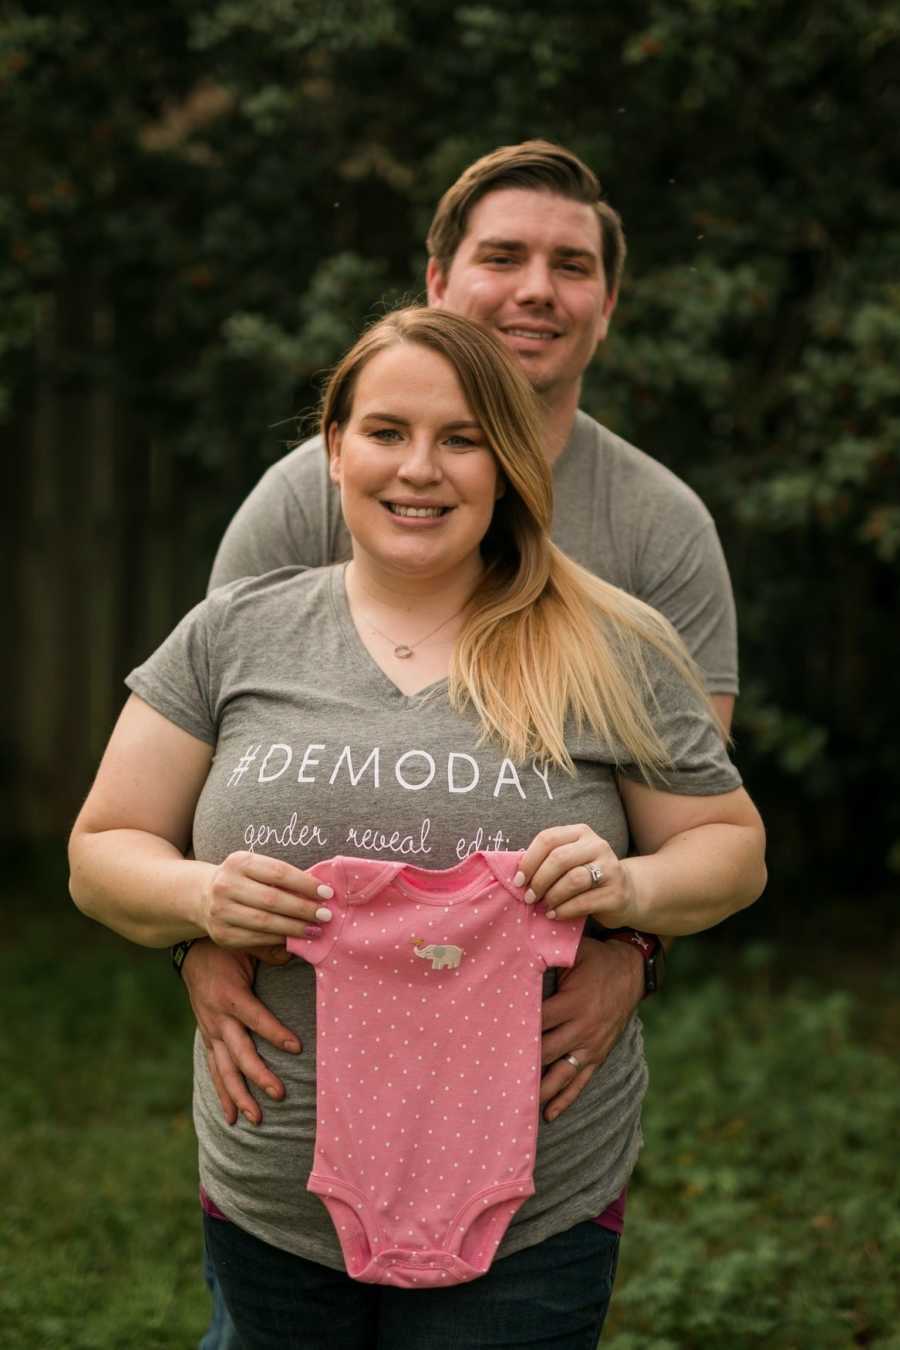 Husband stands with arms around wife who is holding pink onesie for baby who was conceived through IVF